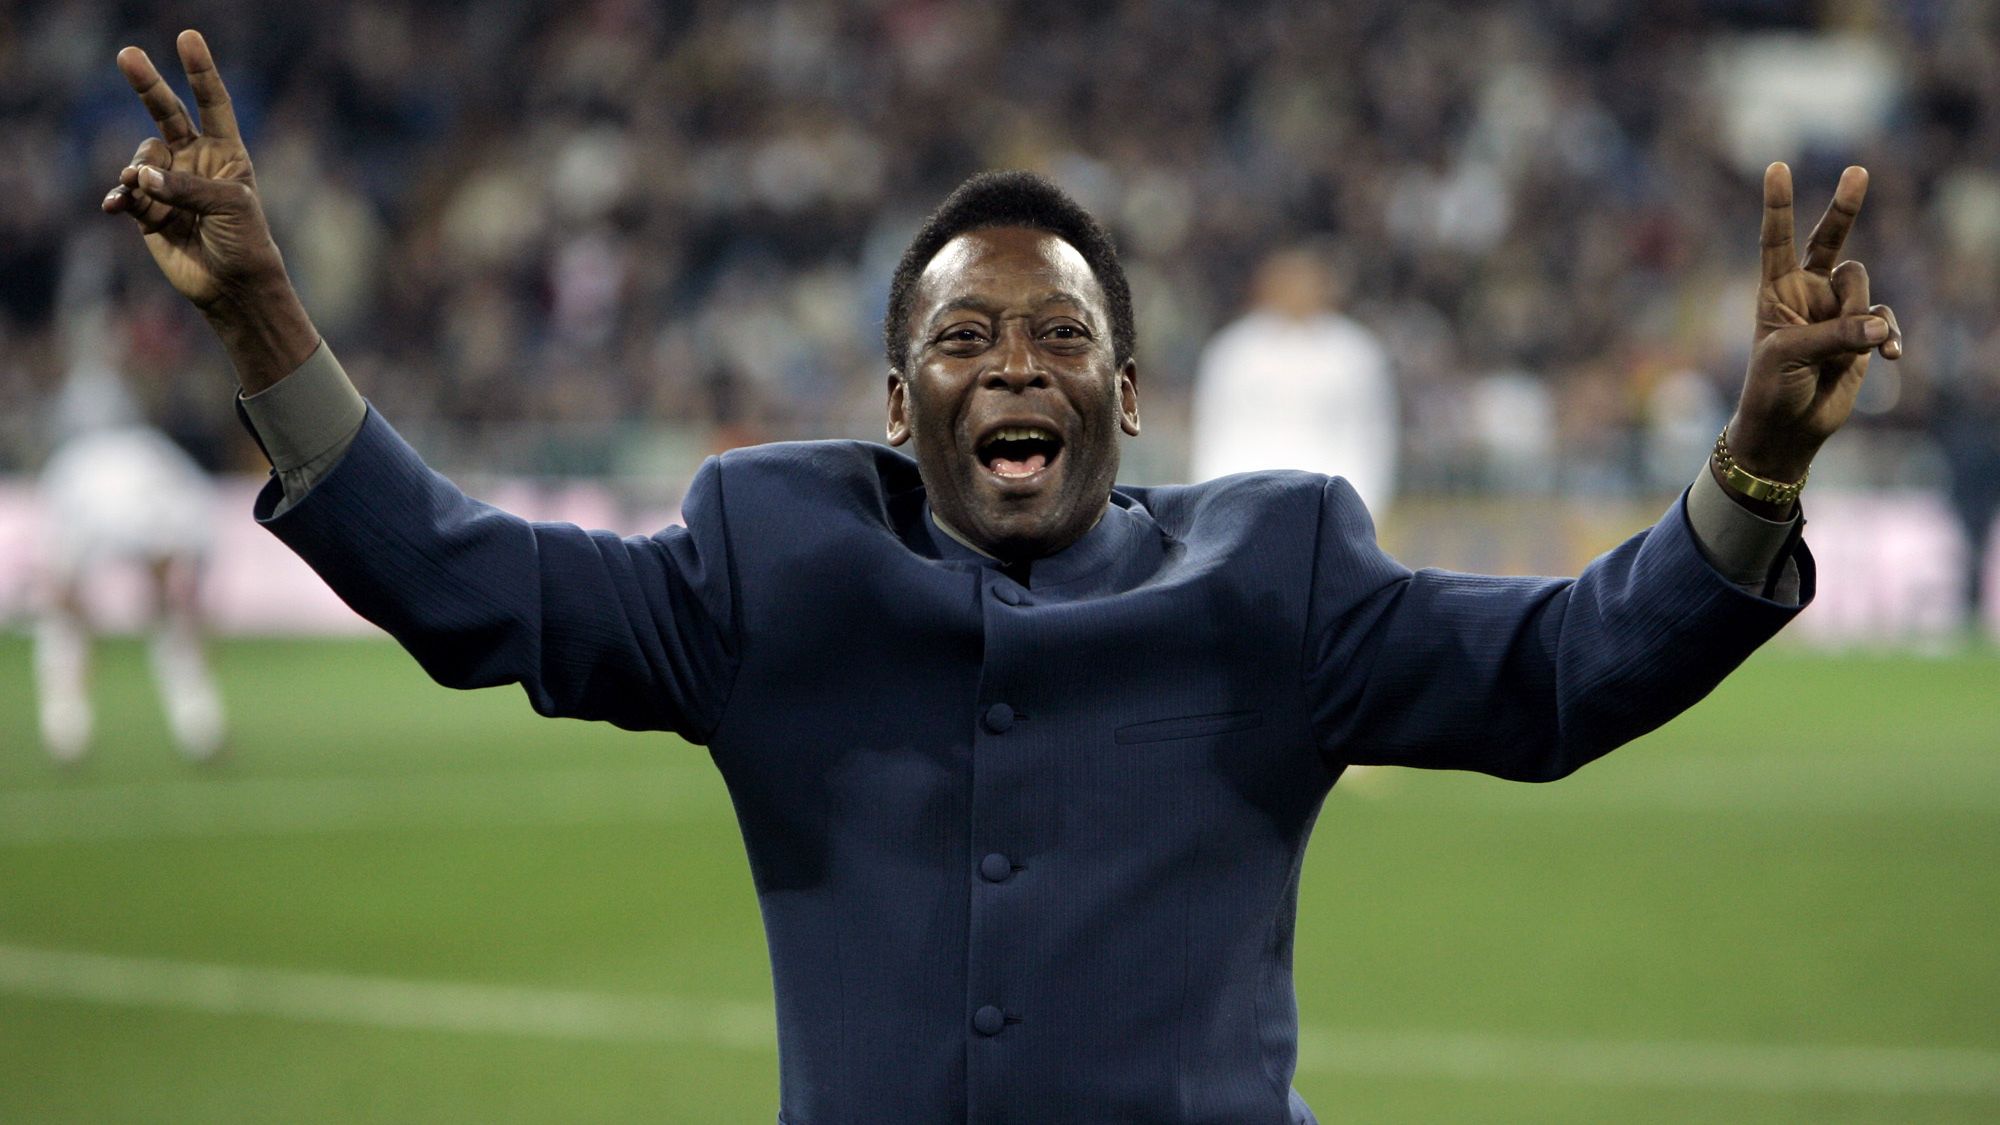 Tributes flood in for 'most divine' Pele, who has died aged 82